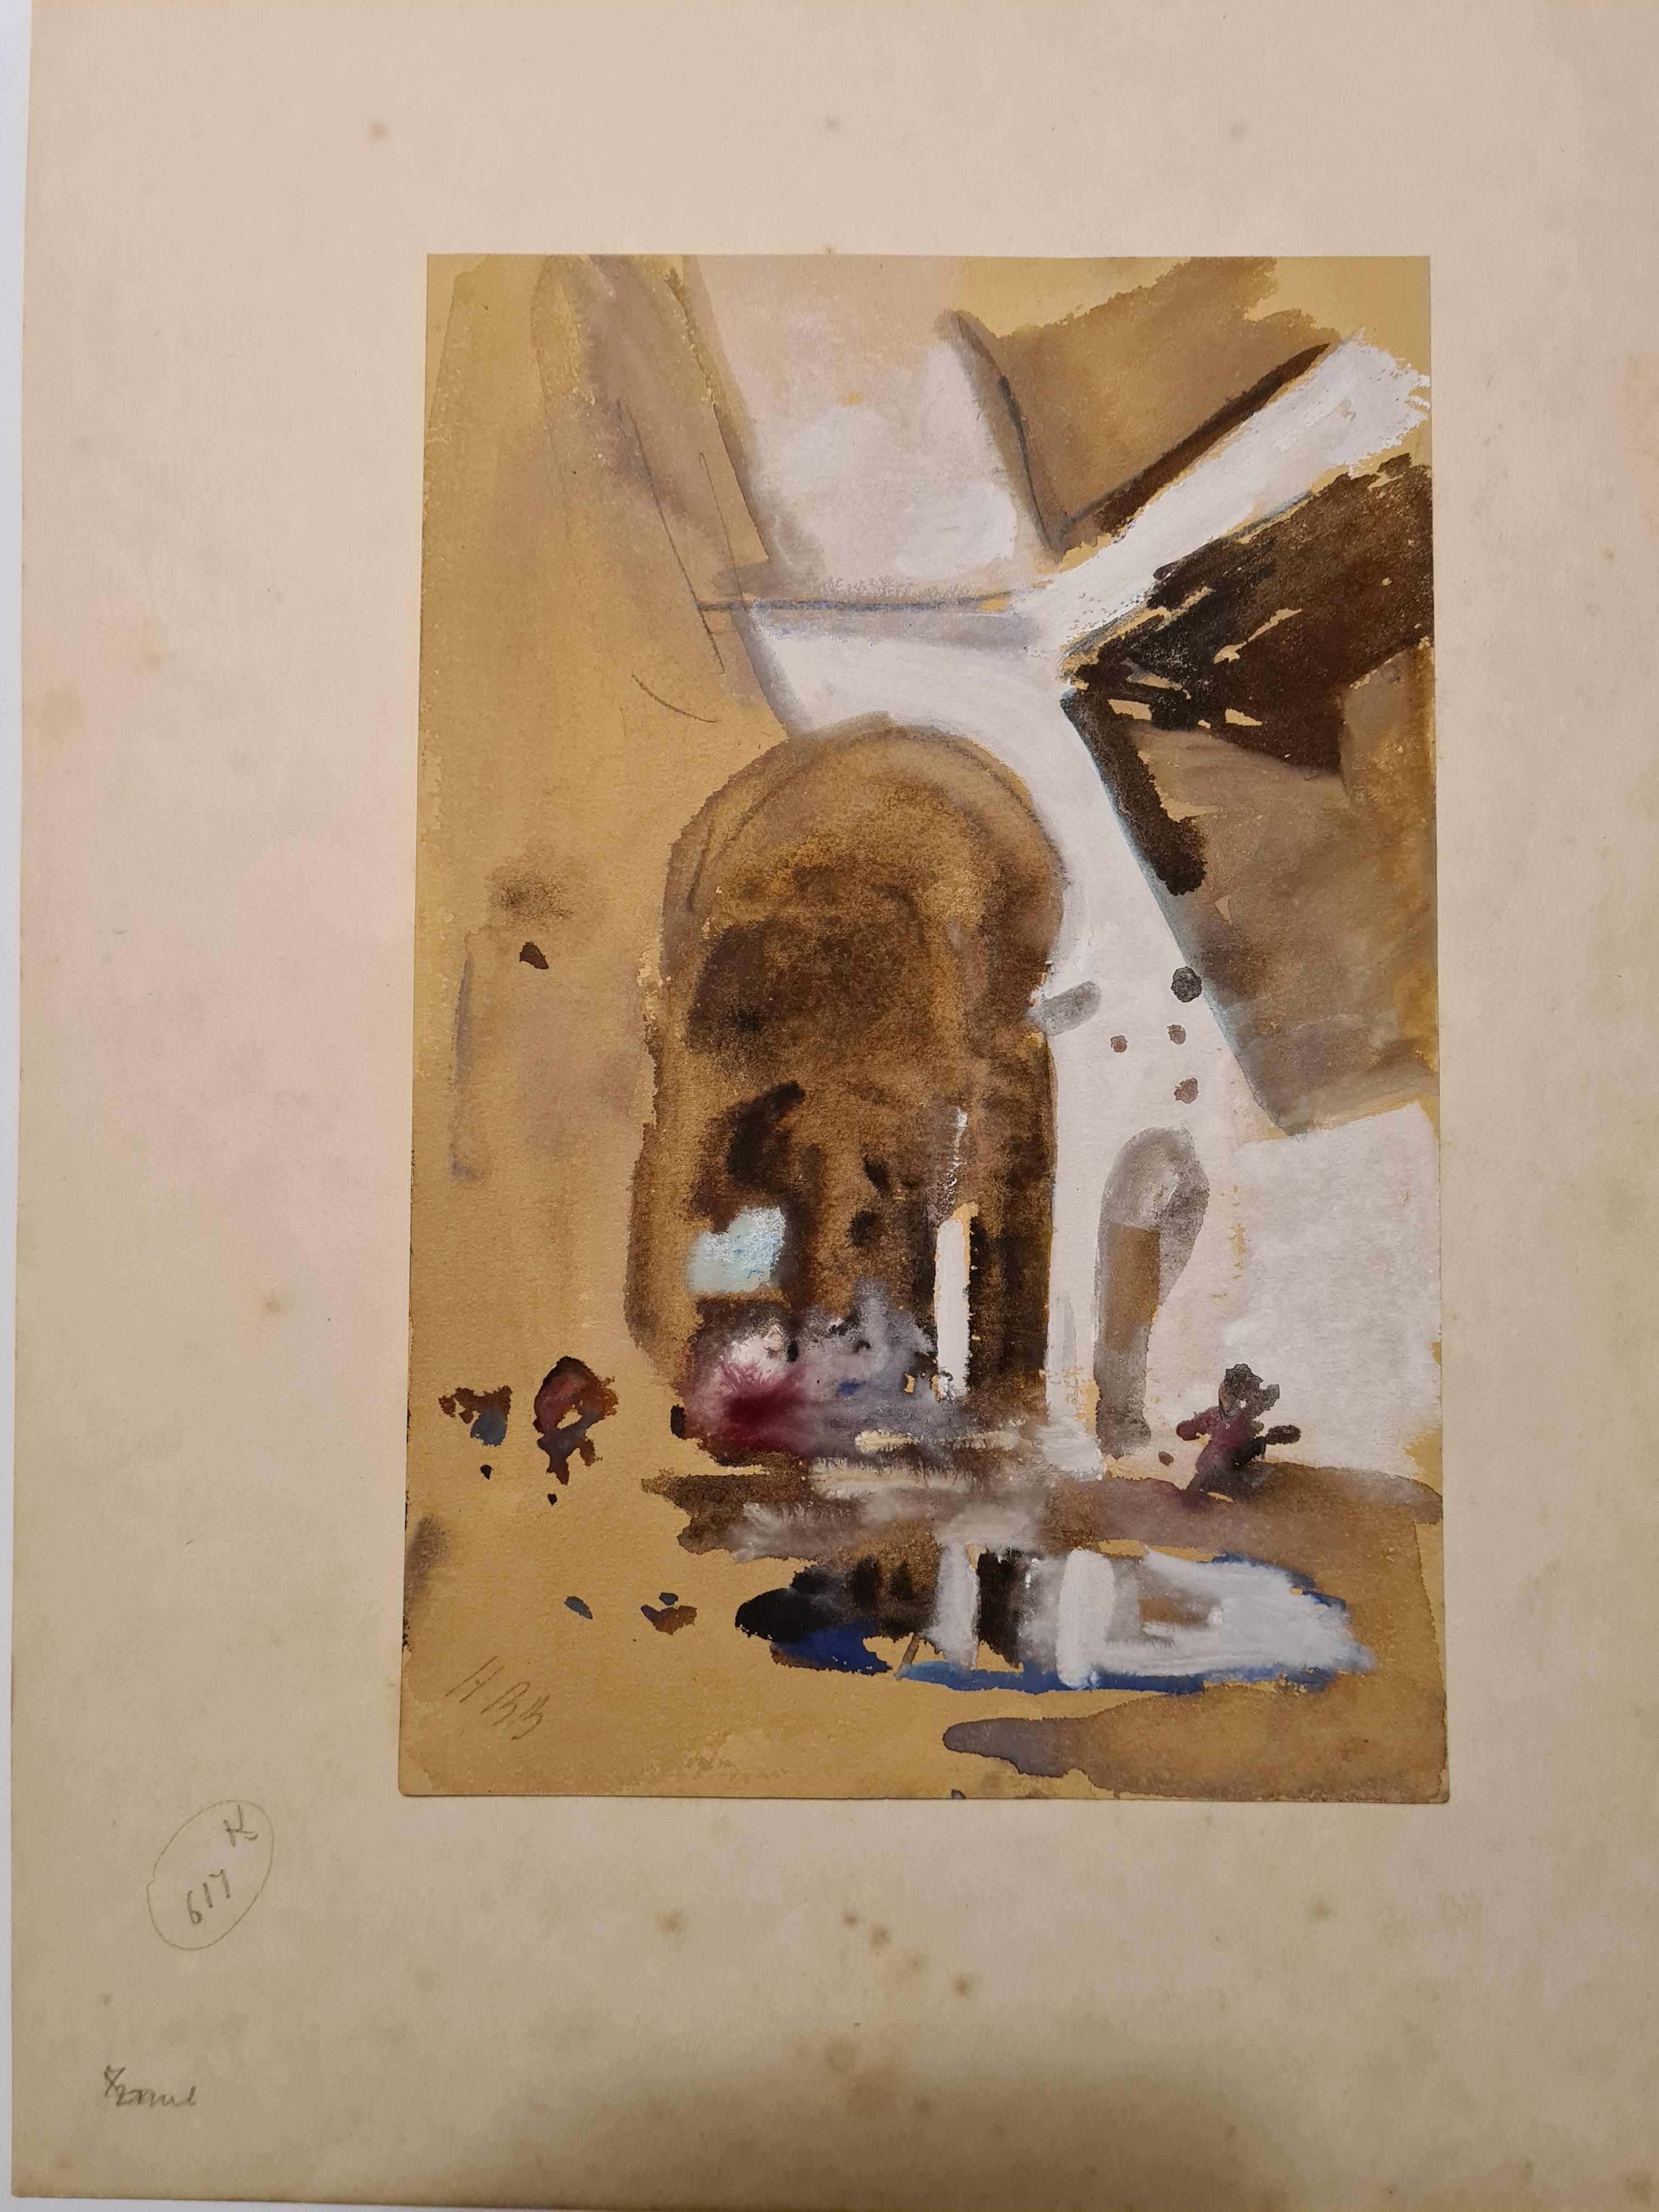 
Mid 19th century watercolour study of The Colosseum, Rome, reflections, light and shade, by Hercules Brabazon Brabazon. The work is titled 'Rome' on the mount and initial signed (HBB) by the artist.

Almost abstract in its composition Brabazon